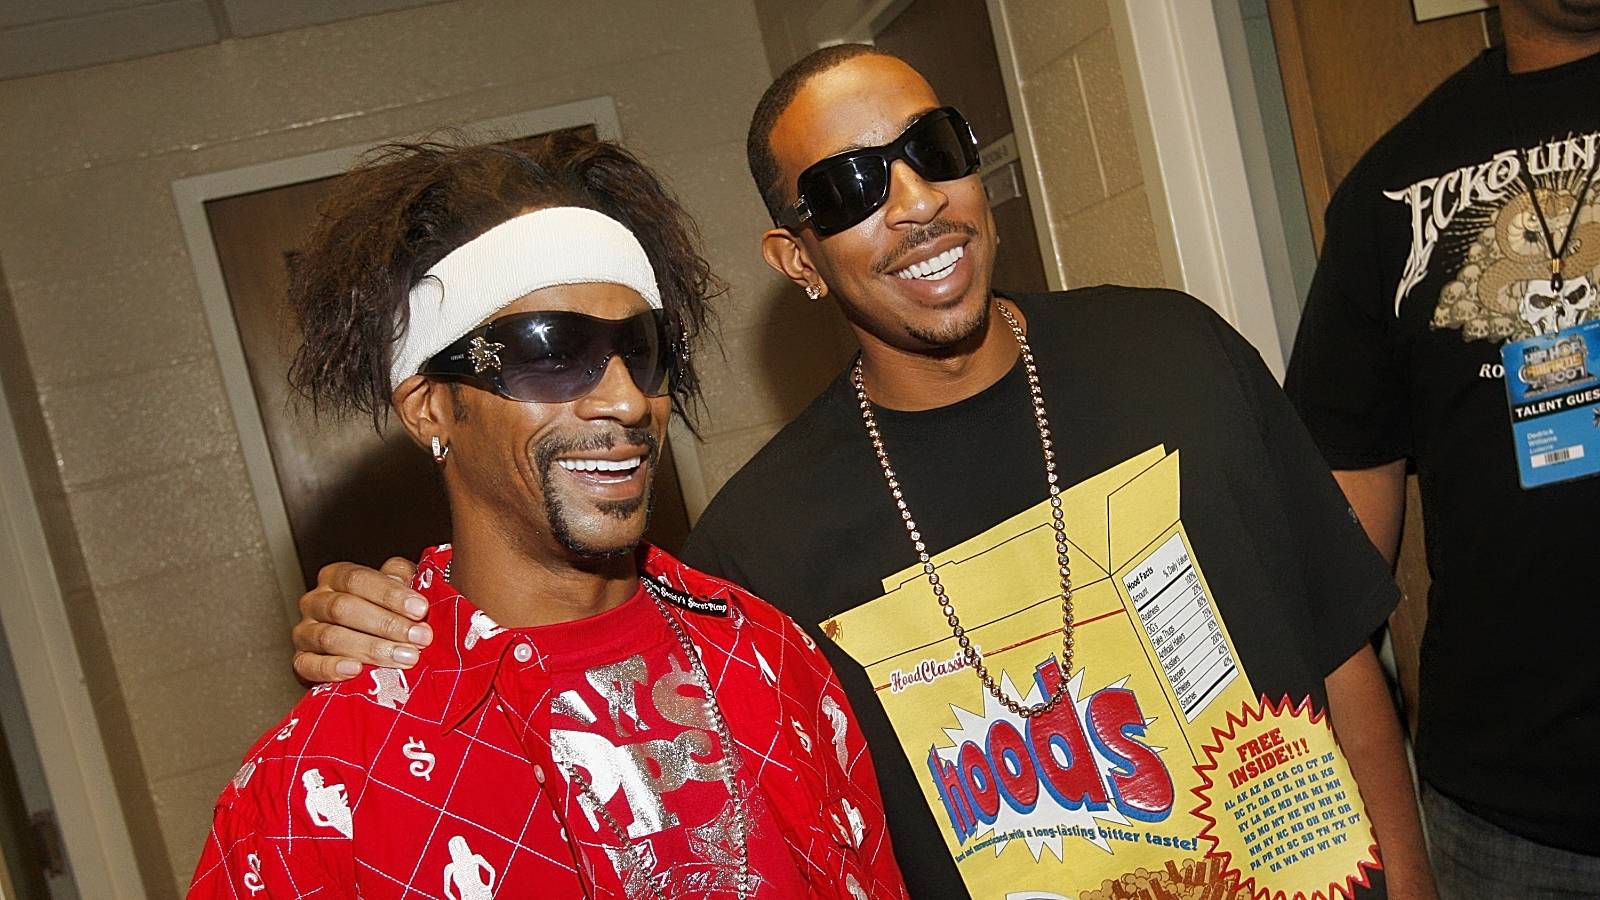 Katt Williams and rapper Ludacris backstage at the BET Hip Hop Awards 2007 at the Atlanta Civic Center on October 13, 2007 in Atlanta, GA. (Photo by Ben Rose/WireImage)